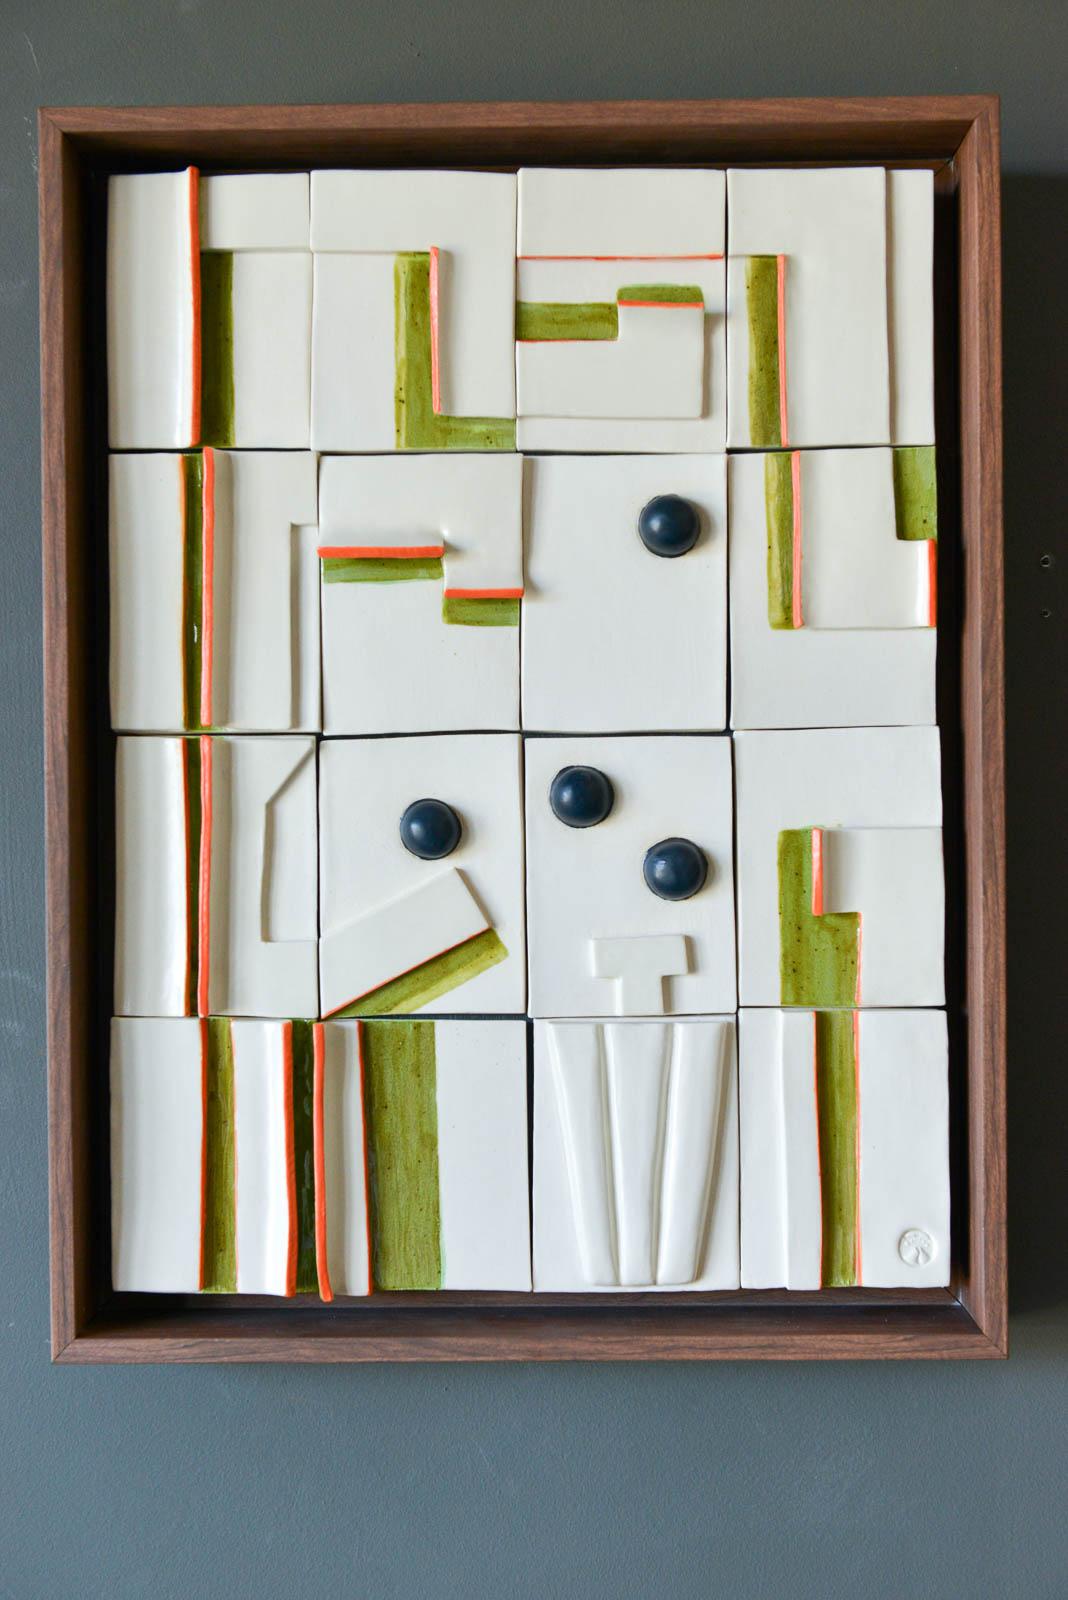 Ceramic wall relief by California Artist Adele Martin, 'Manzanita Tree-Day' Original one of a kind ceramic wall relief sculpture by California artist Adele Martin, each tile is handcrafted and individually created, glazed and mounted with a